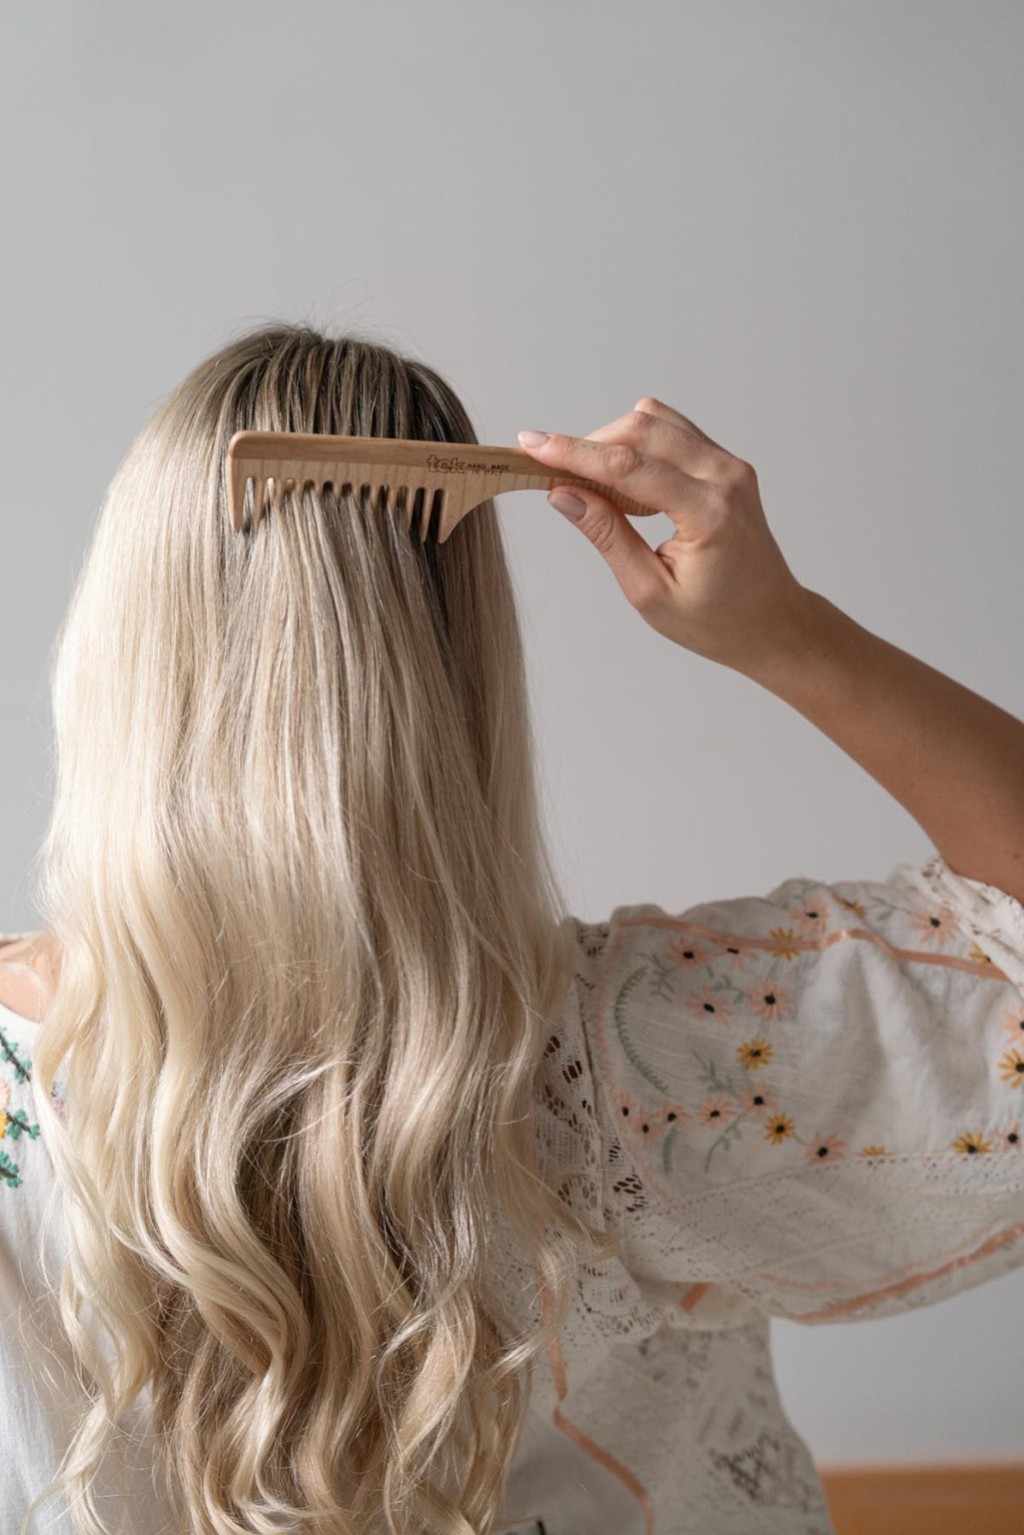 Natural hair care: discover the amazing benefits of wooden brushes and combs!